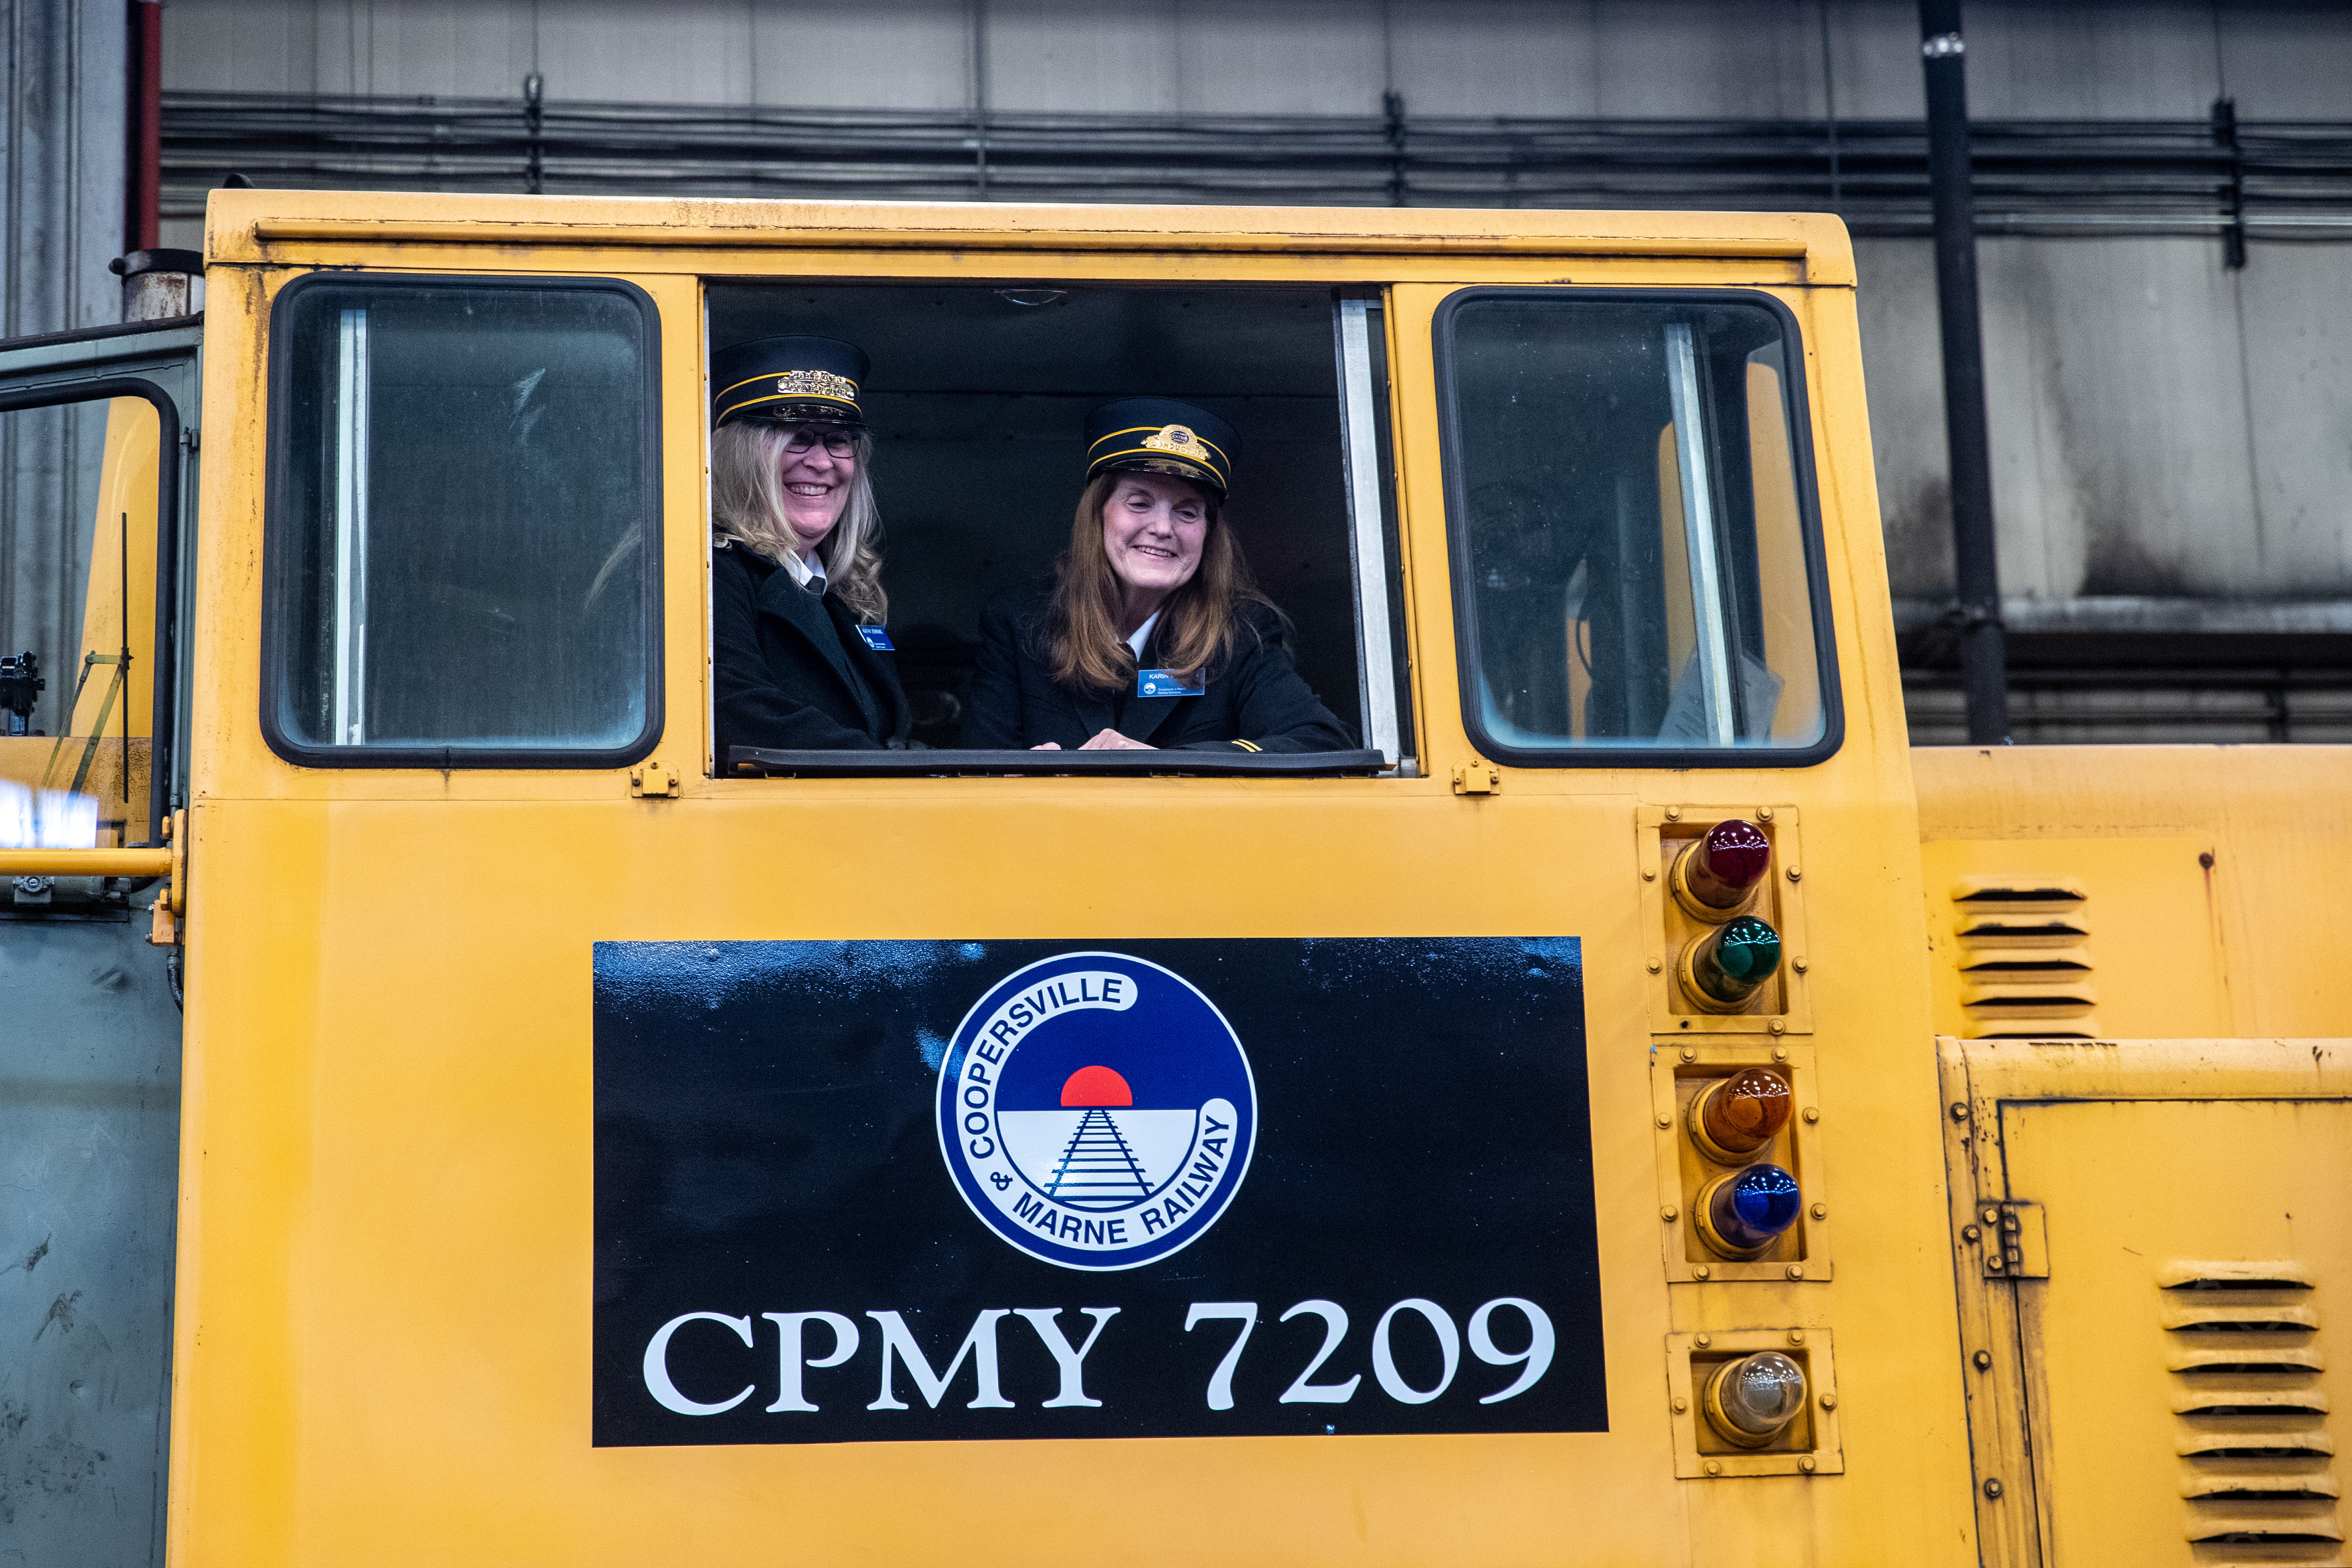 Kathy Jenkins, left, and Karin Bowden, both from the Coopersville and Marne Railway, look out from a 1979 GE diesel train locomotive at the Consumers Energy J.H. Campbell plant in Port Sheldon Township on Monday, Feb. 13, 2023. Consumers Energy is donating the locomotive to the railway. (Cory Morse | MLive.com)